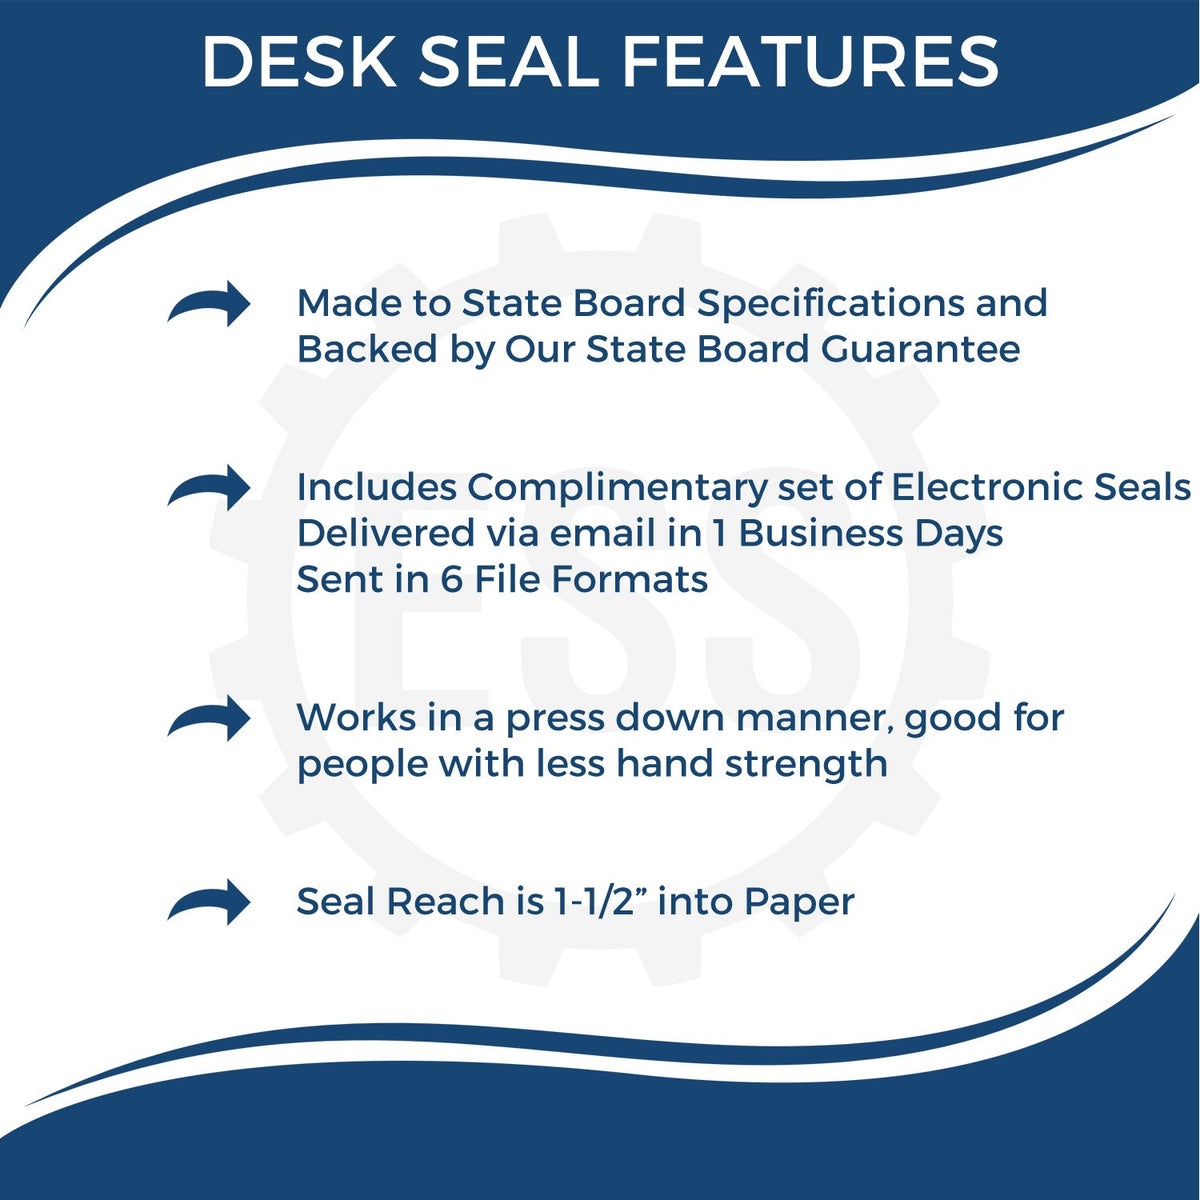 A picture of an infographic highlighting the selling points for the District of Columbia Geologist Desk Seal